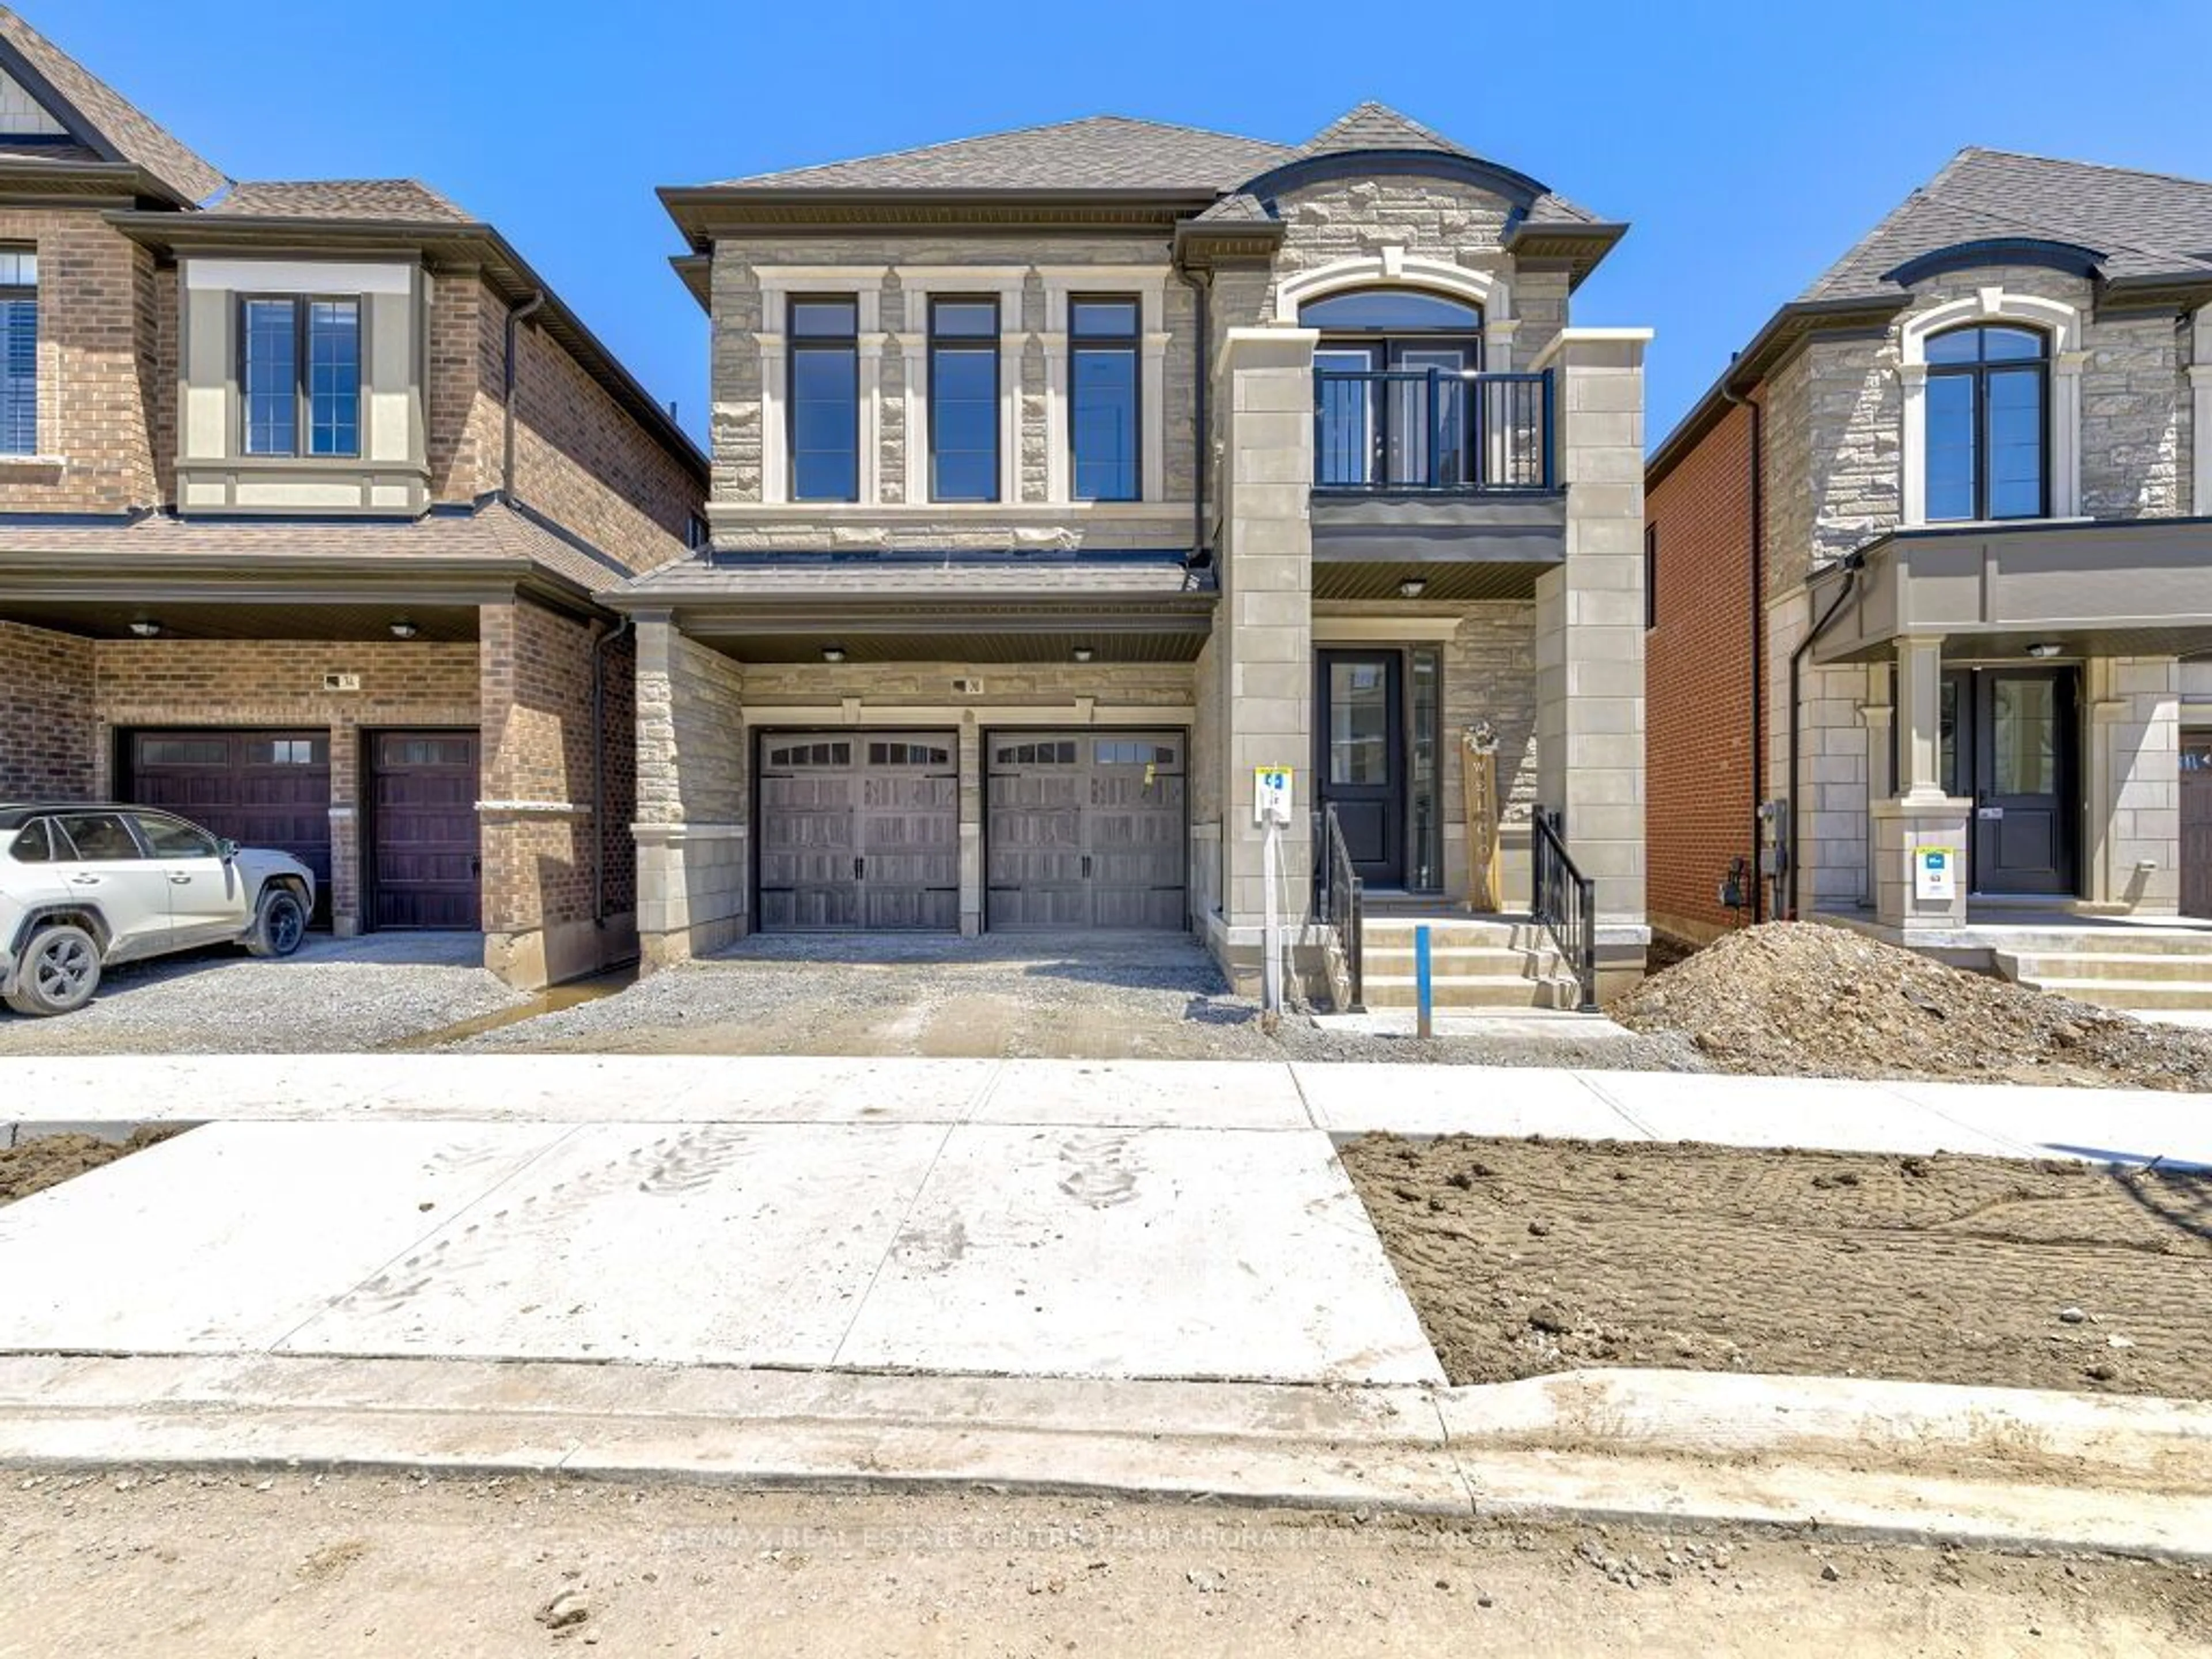 Home with brick exterior material for 70 William Crawley Way, Oakville Ontario L6H 7C6